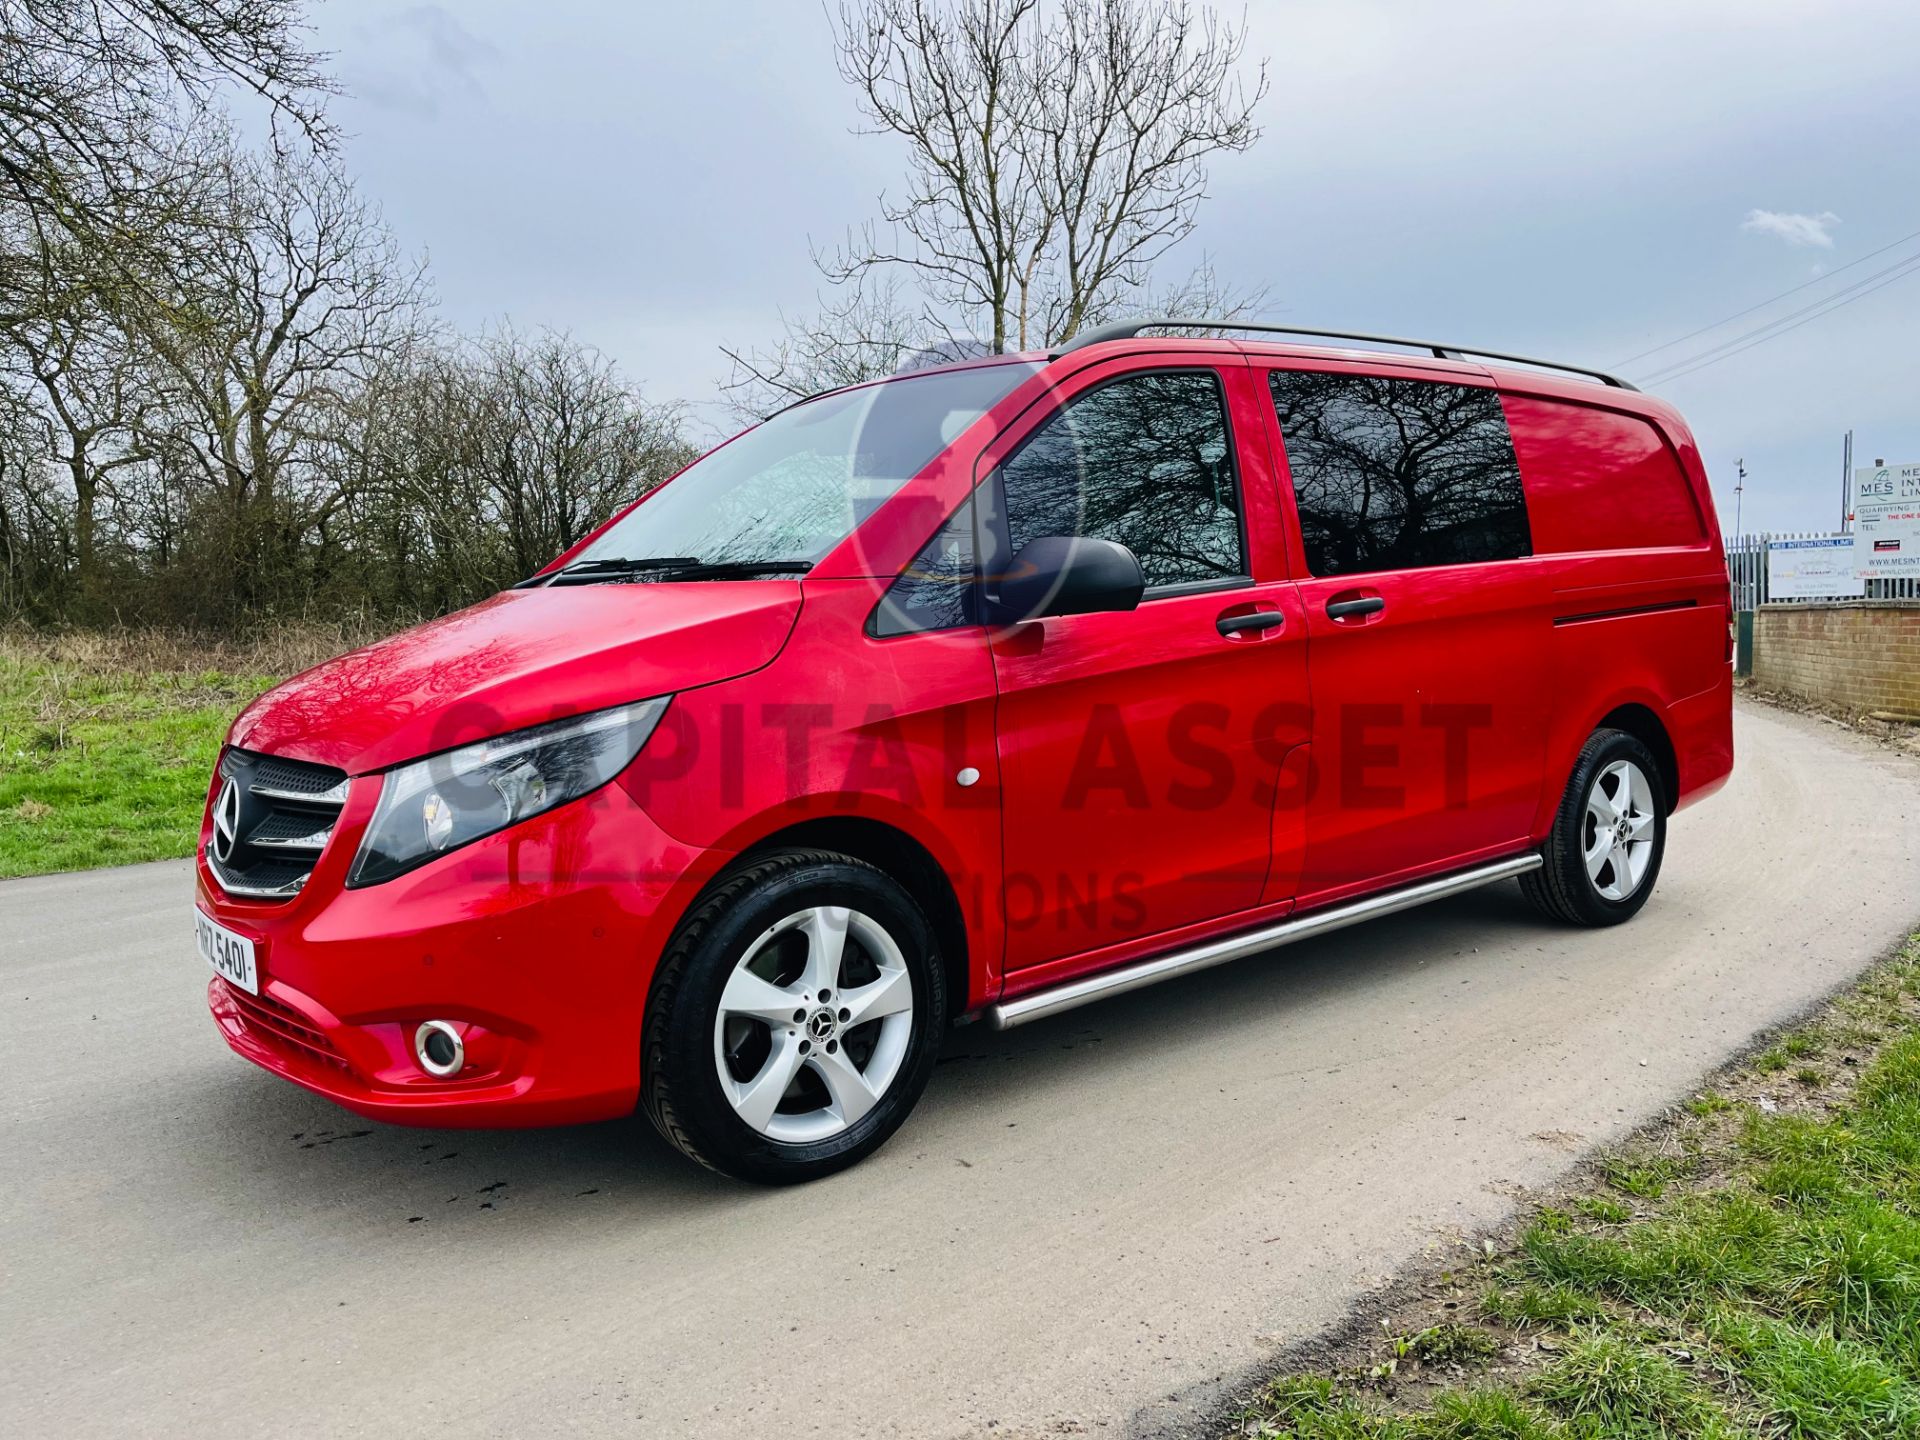 MERCEDES VITO 119CDI "SPORT" 7G-AUTO LWB DUALINER / 5 SEATER (2018 REG) ONLY 28K MILES (NO VAT) - Image 6 of 35